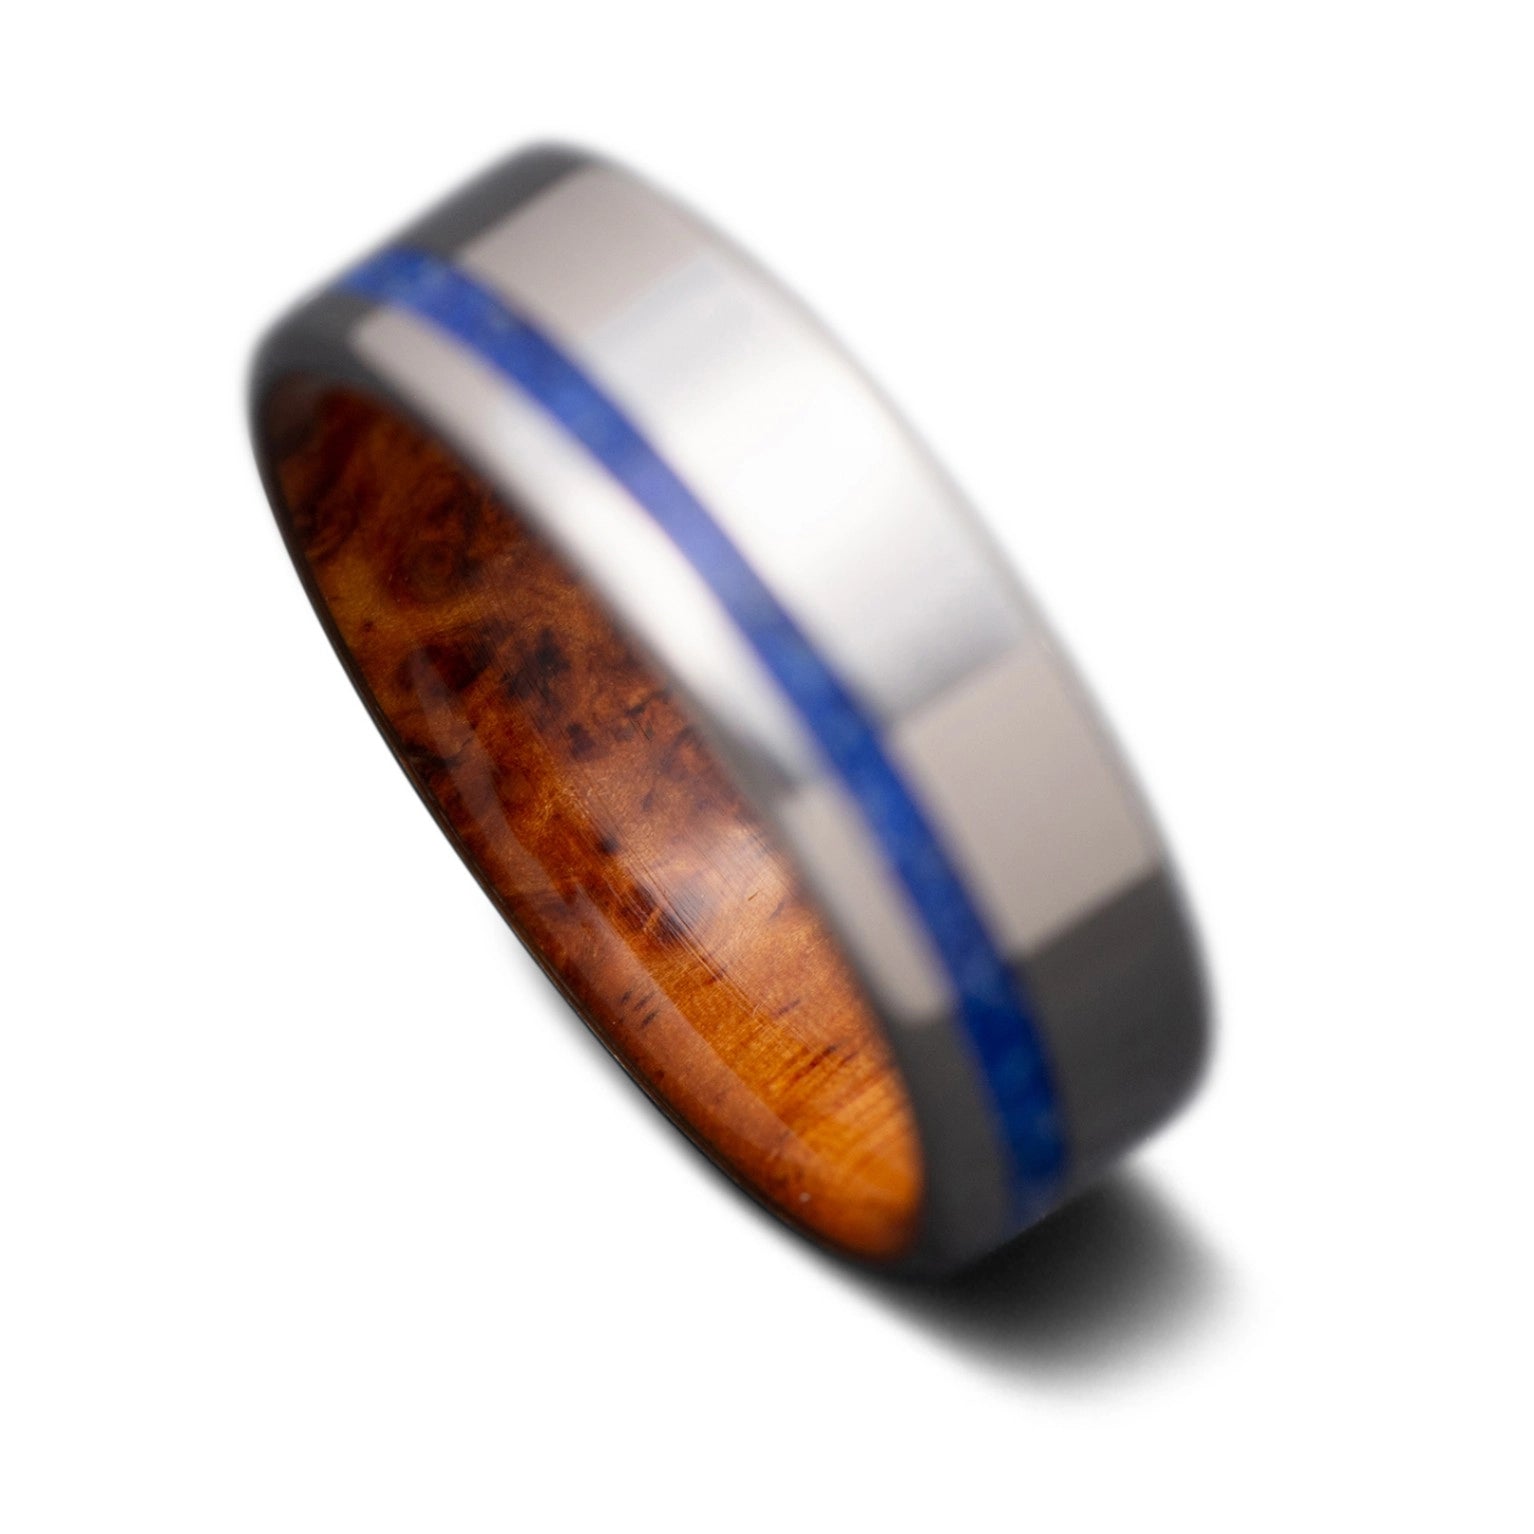  Back of Titanium Core Ring with Lapis Lazuli inlay and  Amboyna inner sleeve, 7mm -THE SHIFT